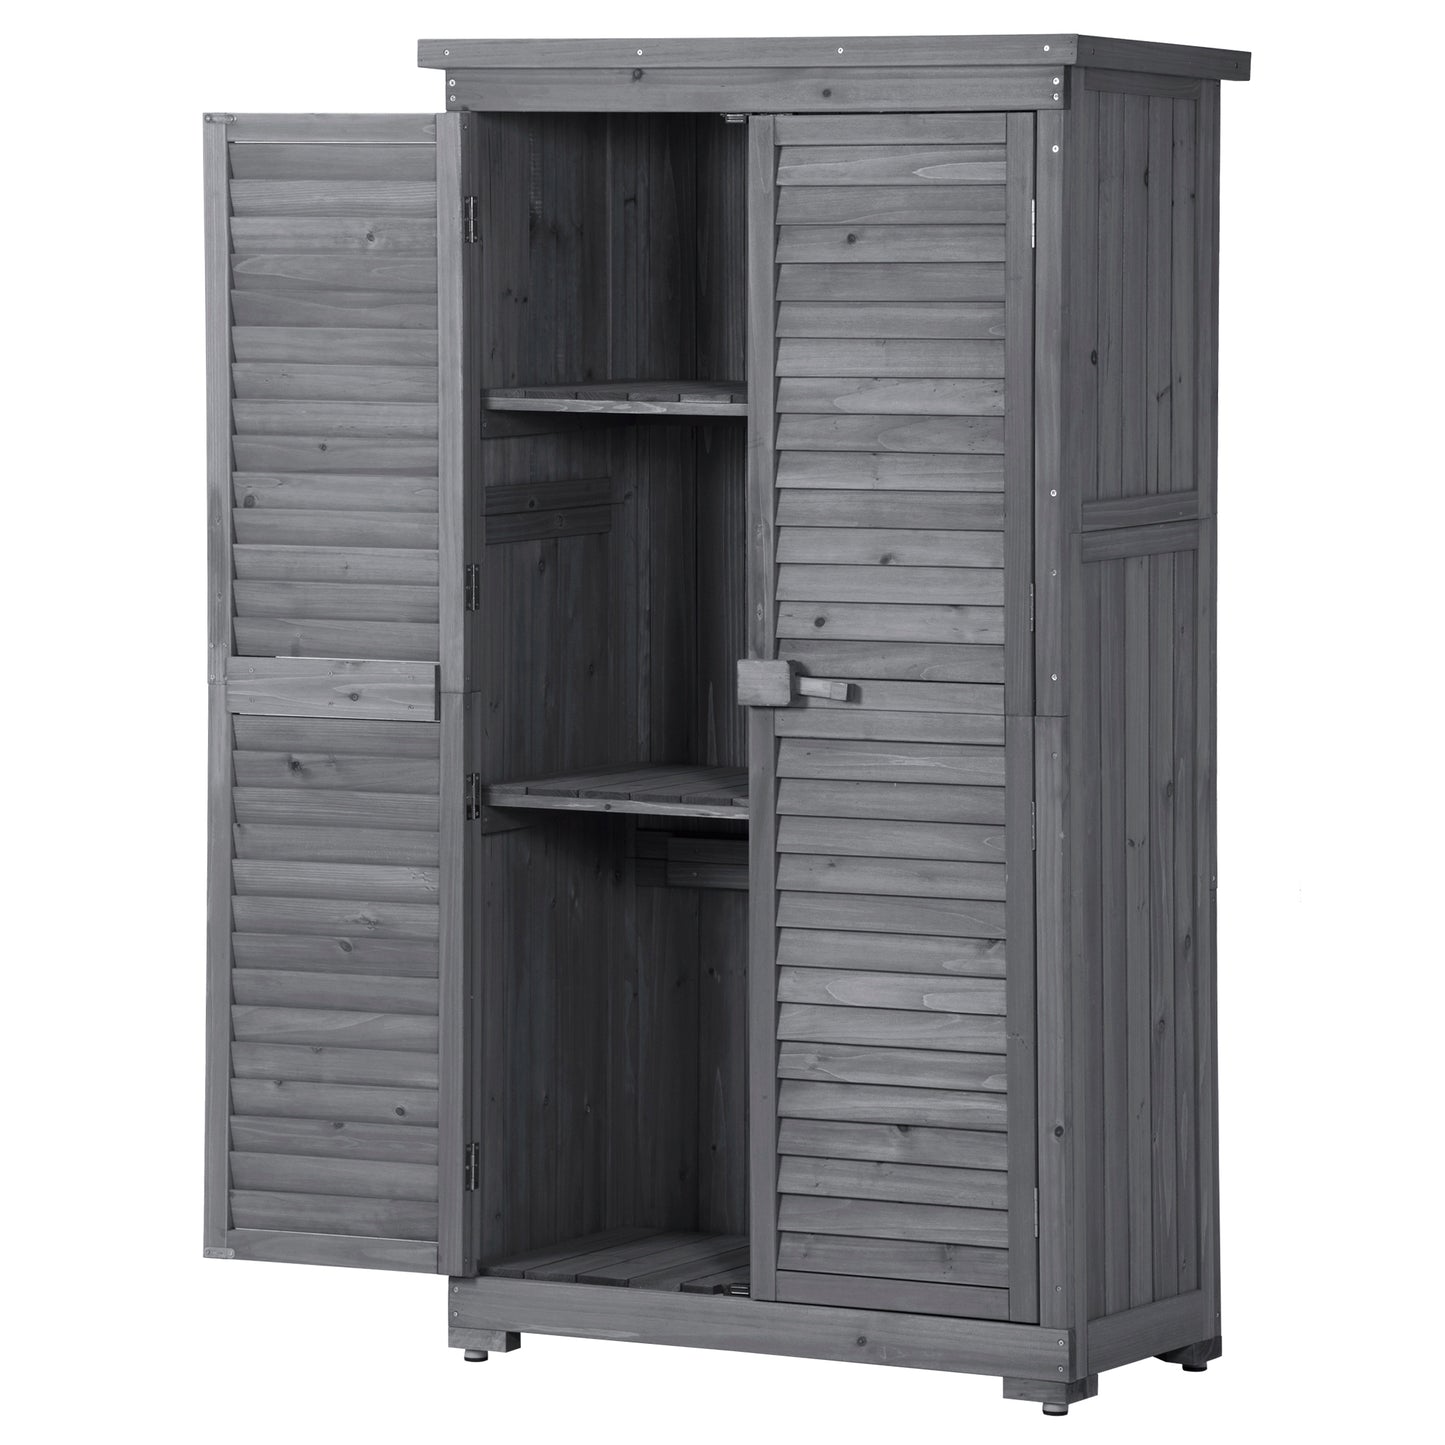 TOPMAX Wooden Garden Shed 3-tier Patio Storage Cabinet Outdoor Organizer Wooden Lockers with Fir Wood (Gray Wood Color -Shutter Design)